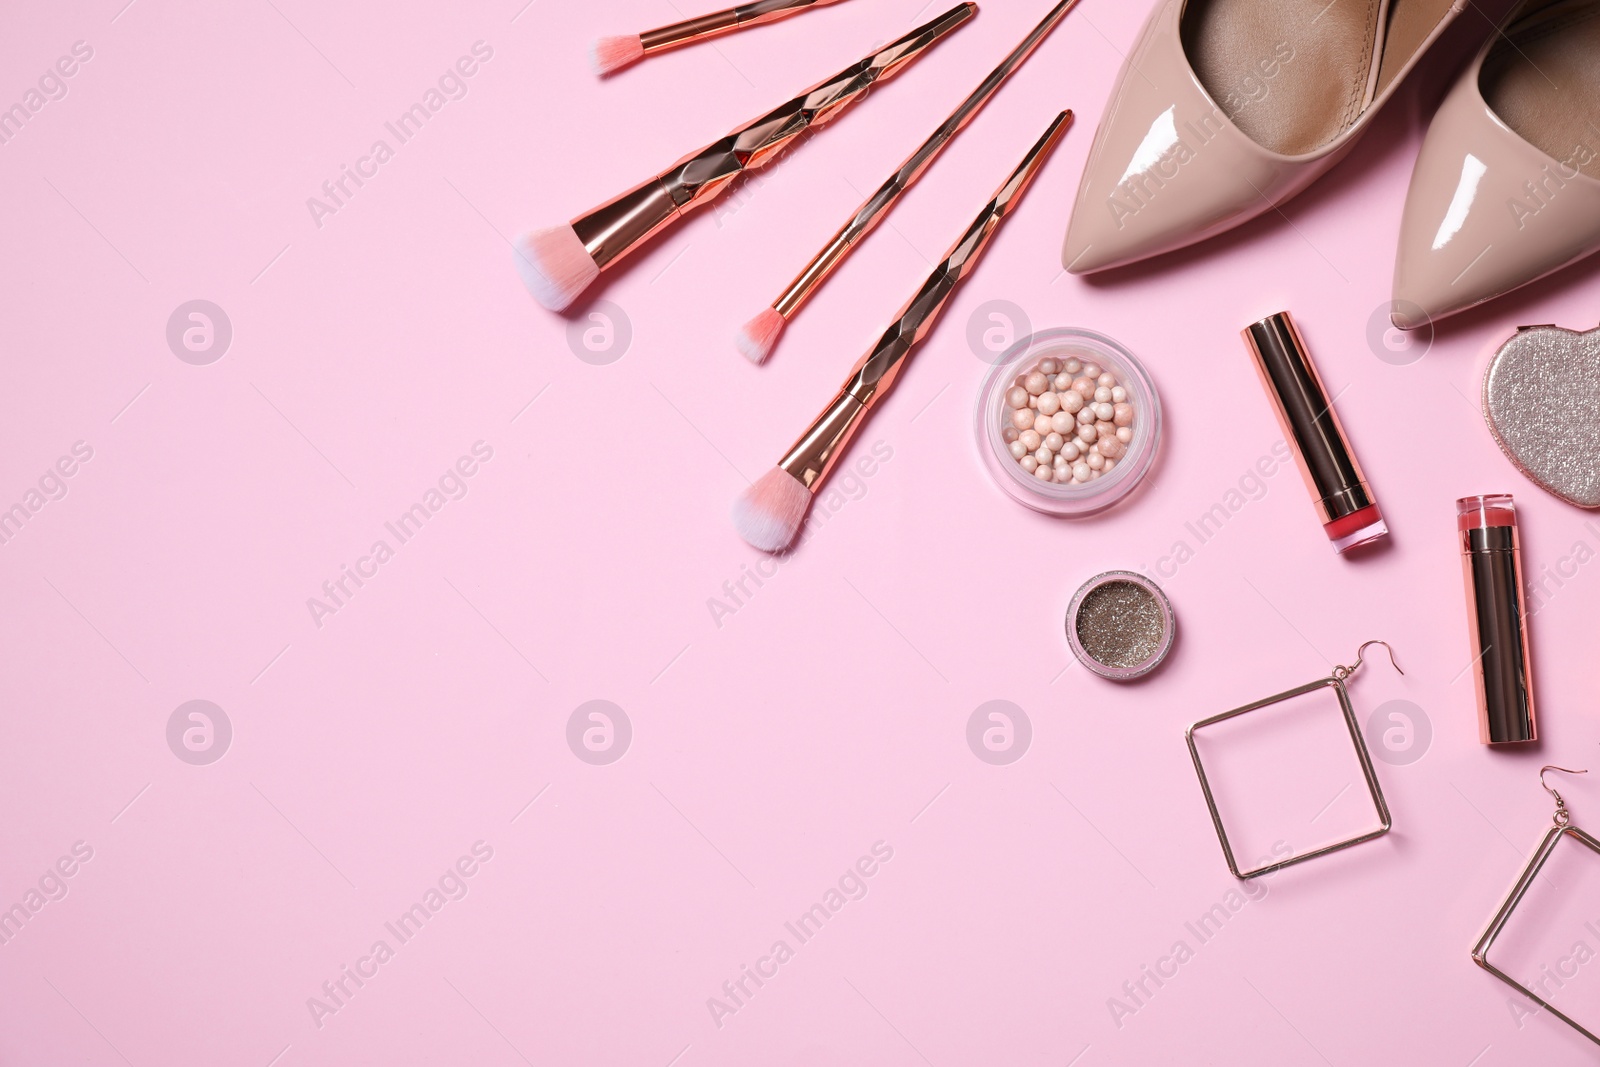 Photo of Makeup products, earrings and women's accessories on pink background, flat lay. Space for text